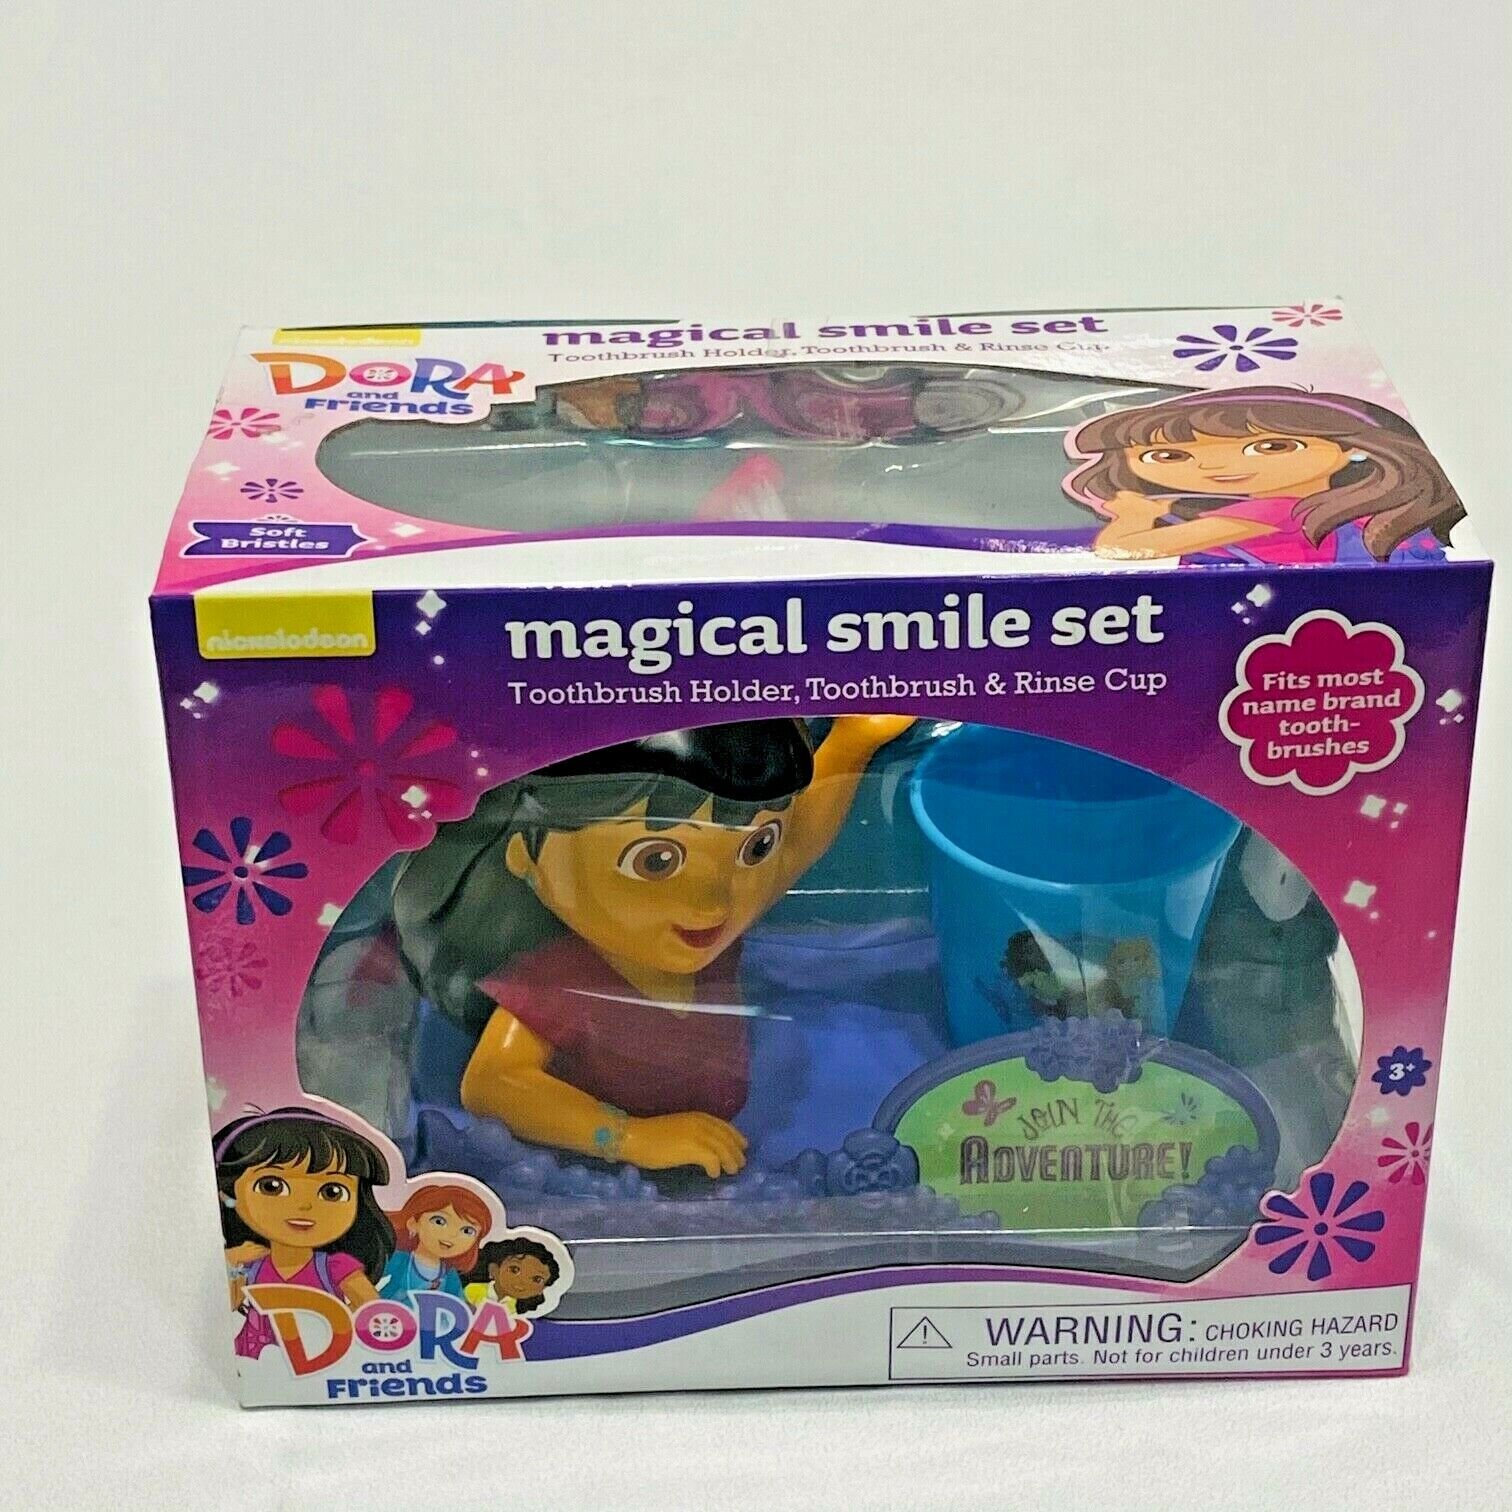 Dora the Explorer Magical Smile Set Toothbrush with Holder Rin...